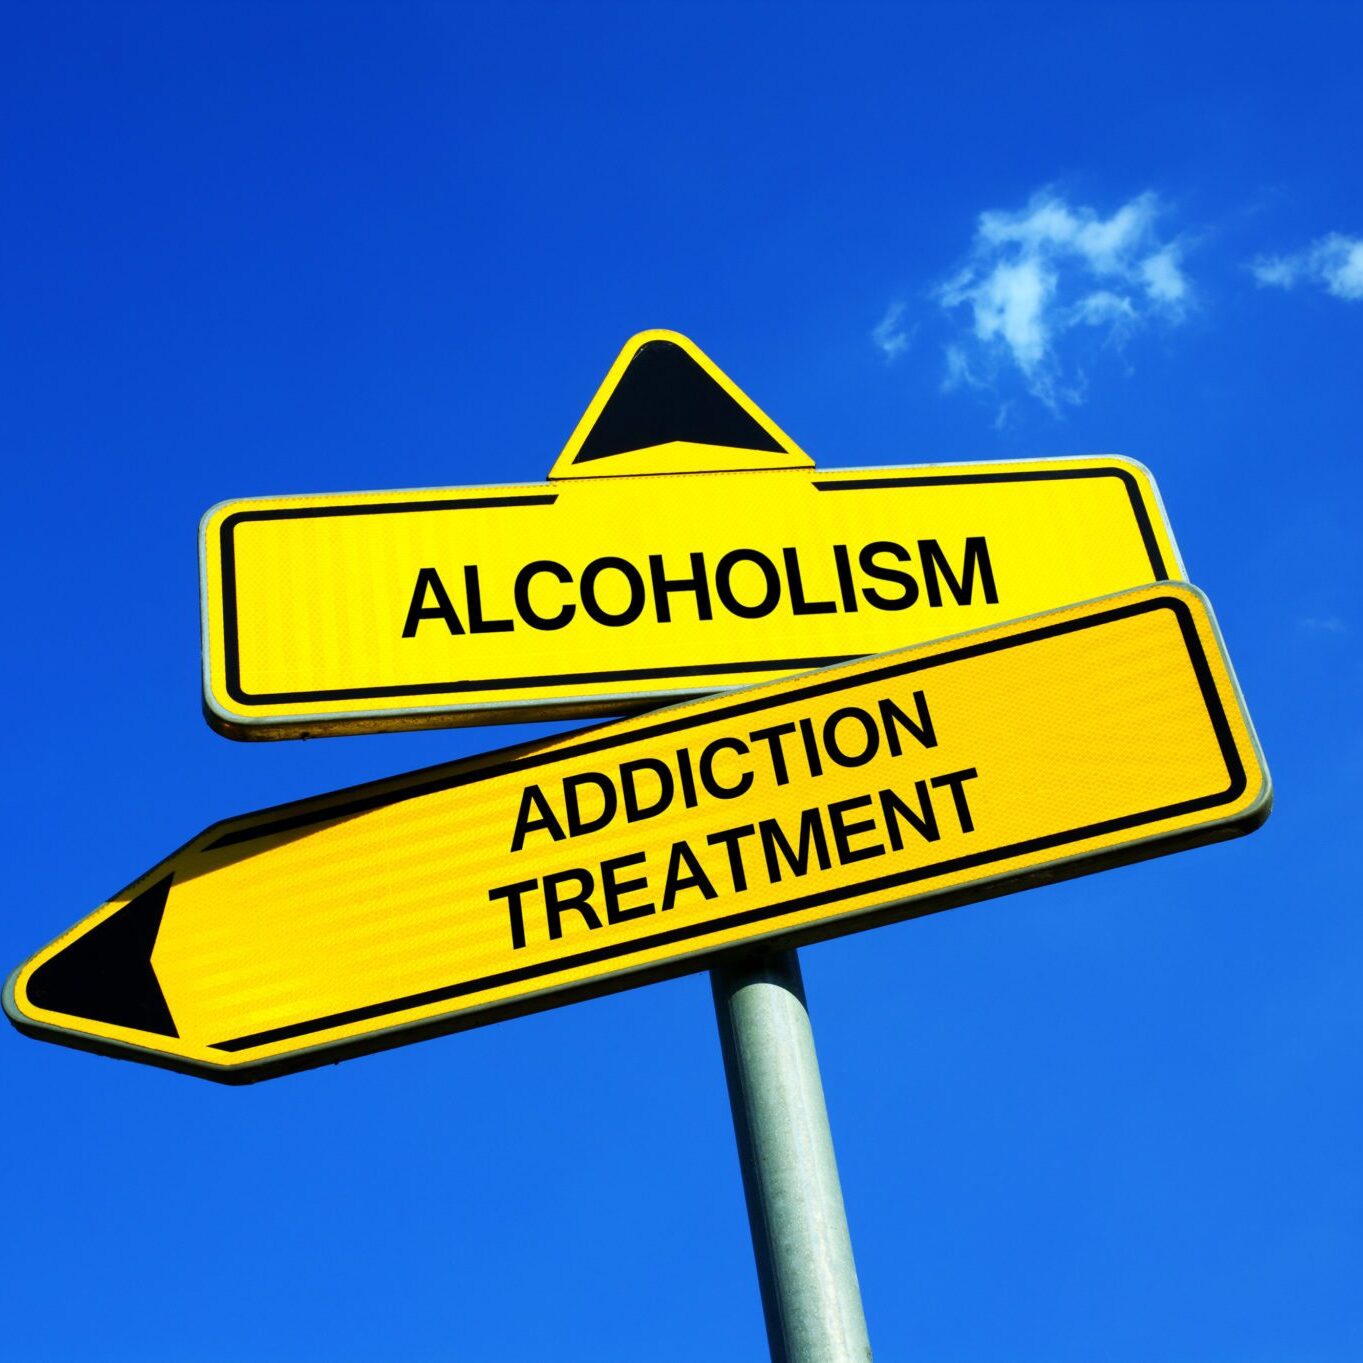 Alcoholism vs Addiction treatment - Traffic sign with two options - appeal to overcome addictive alcohol abuse and dependence through detoxifiction, treatment, rehabilitation and abstinence